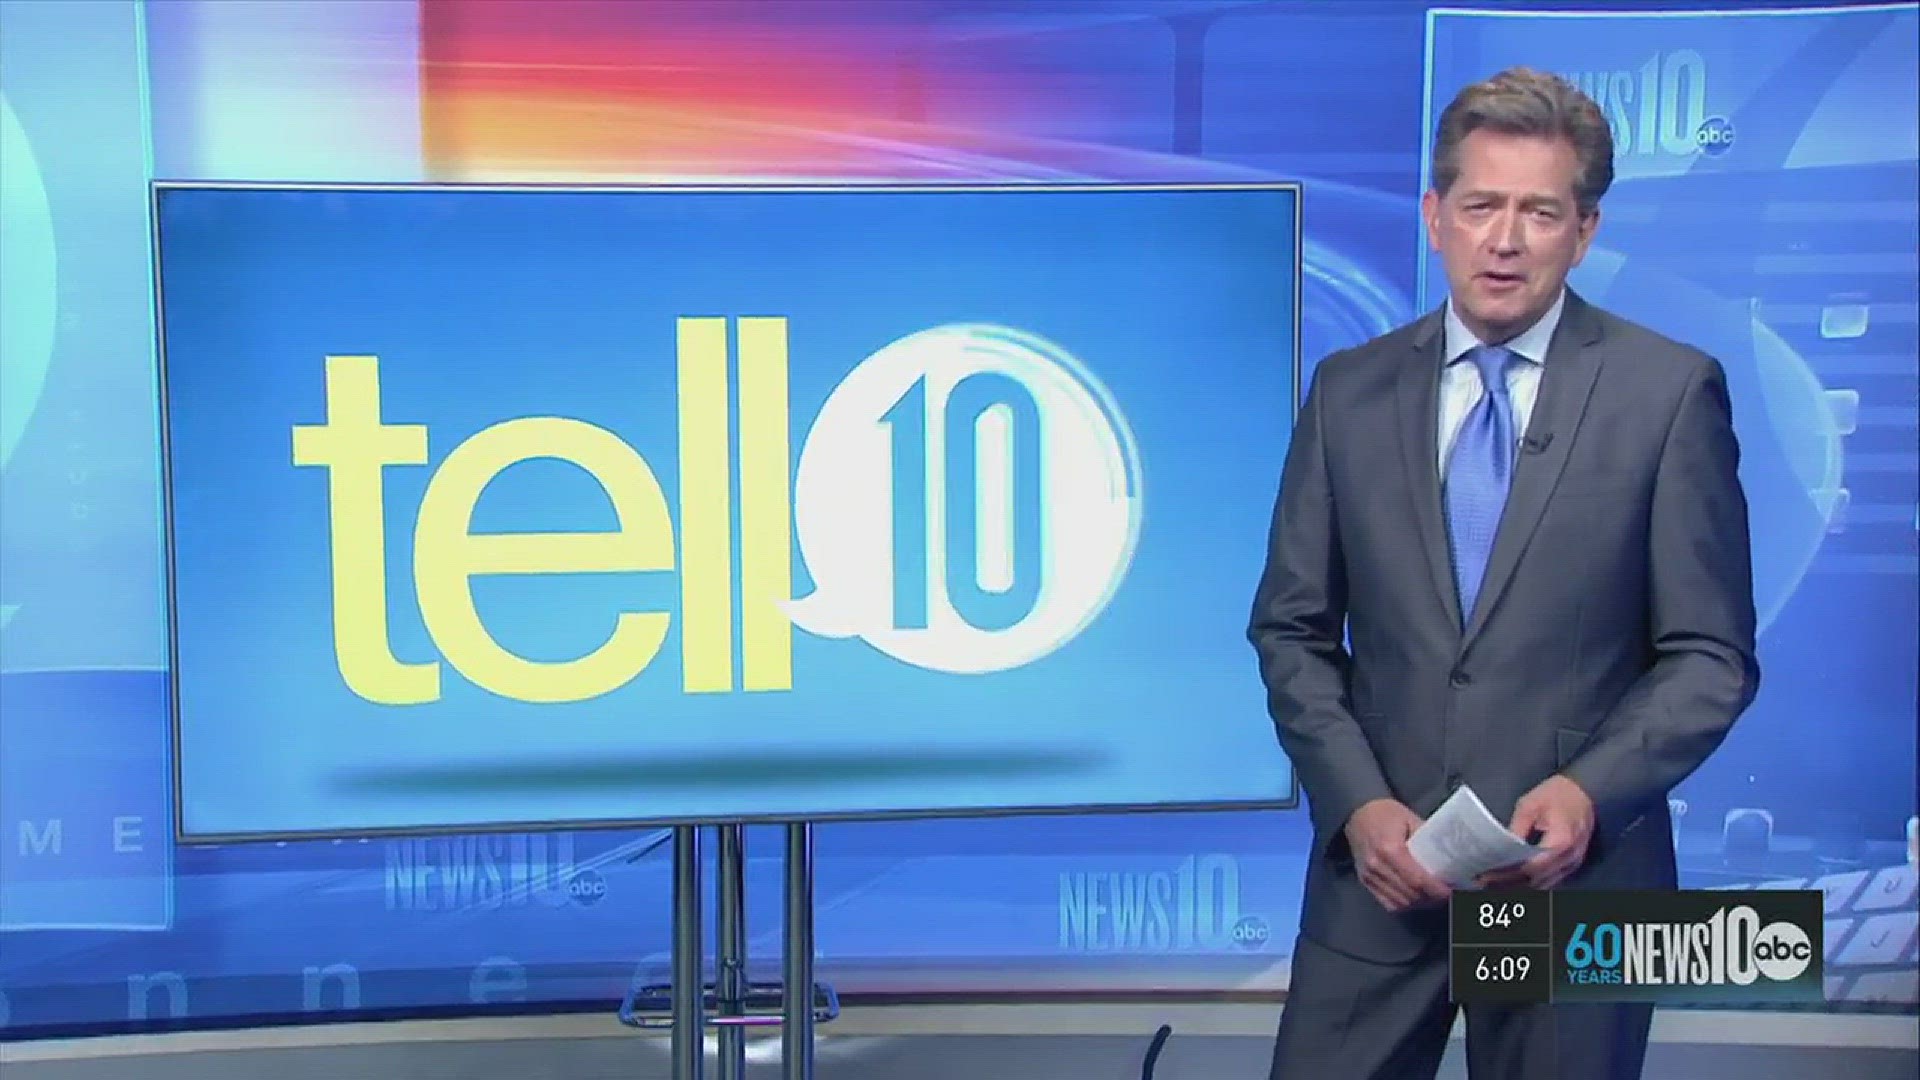 In Tell10 for Friday, Aug. 7, 2015, viewers called News10 about felons being allowed to vote, sexual harassment at Sacramento City Hall, climate change plan and social media.